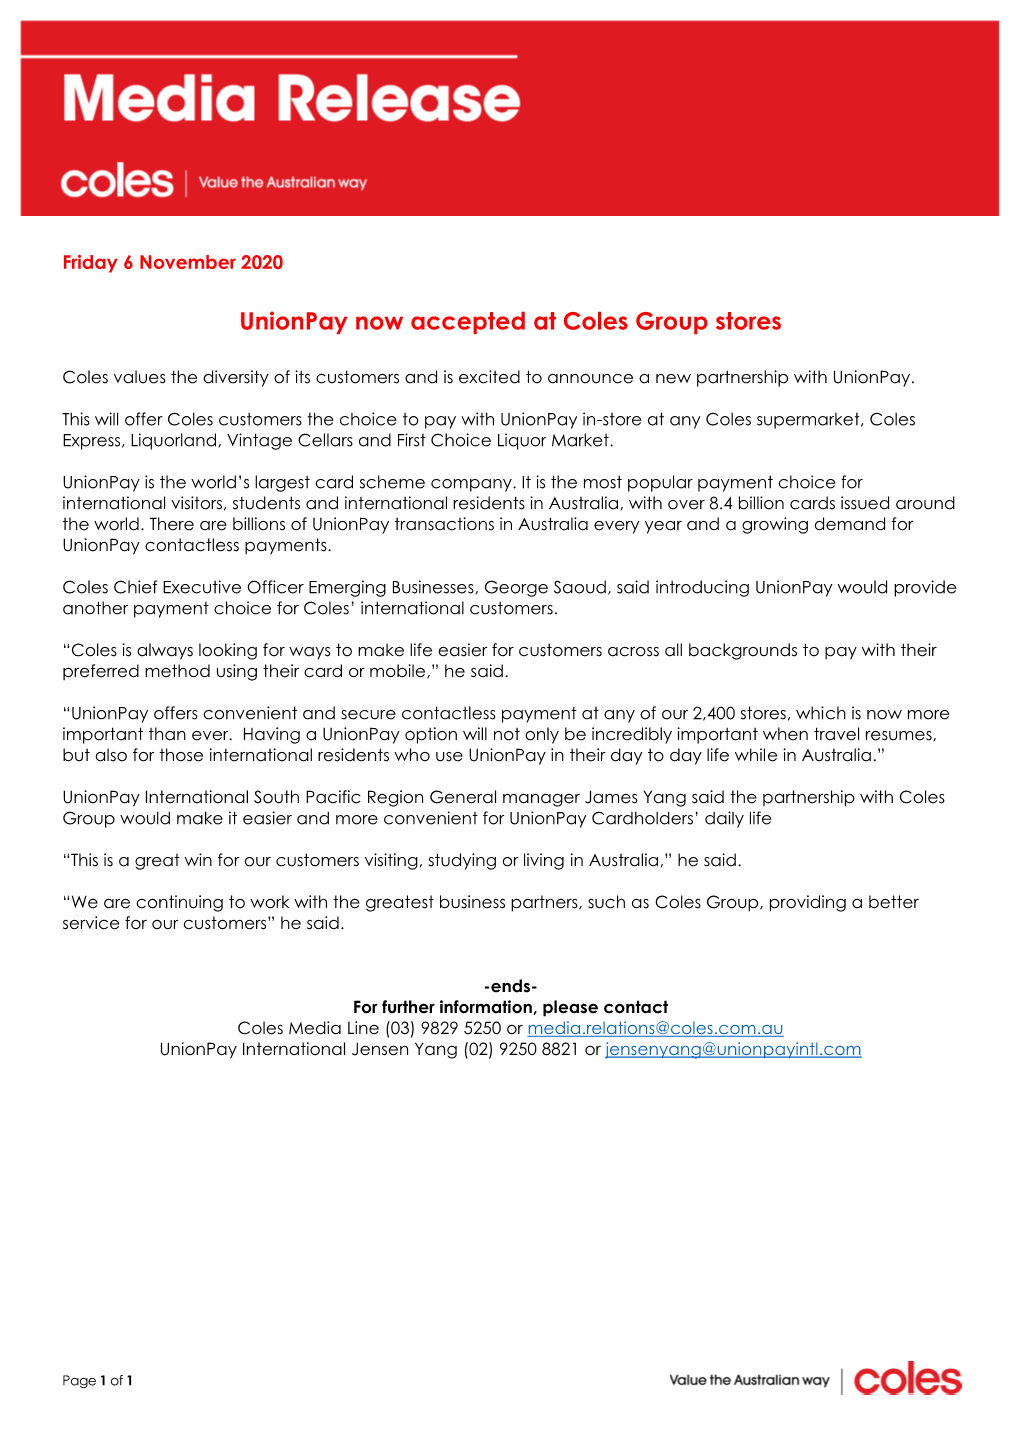 Unionpay Now Accepted at Coles Group Stores.Pdf